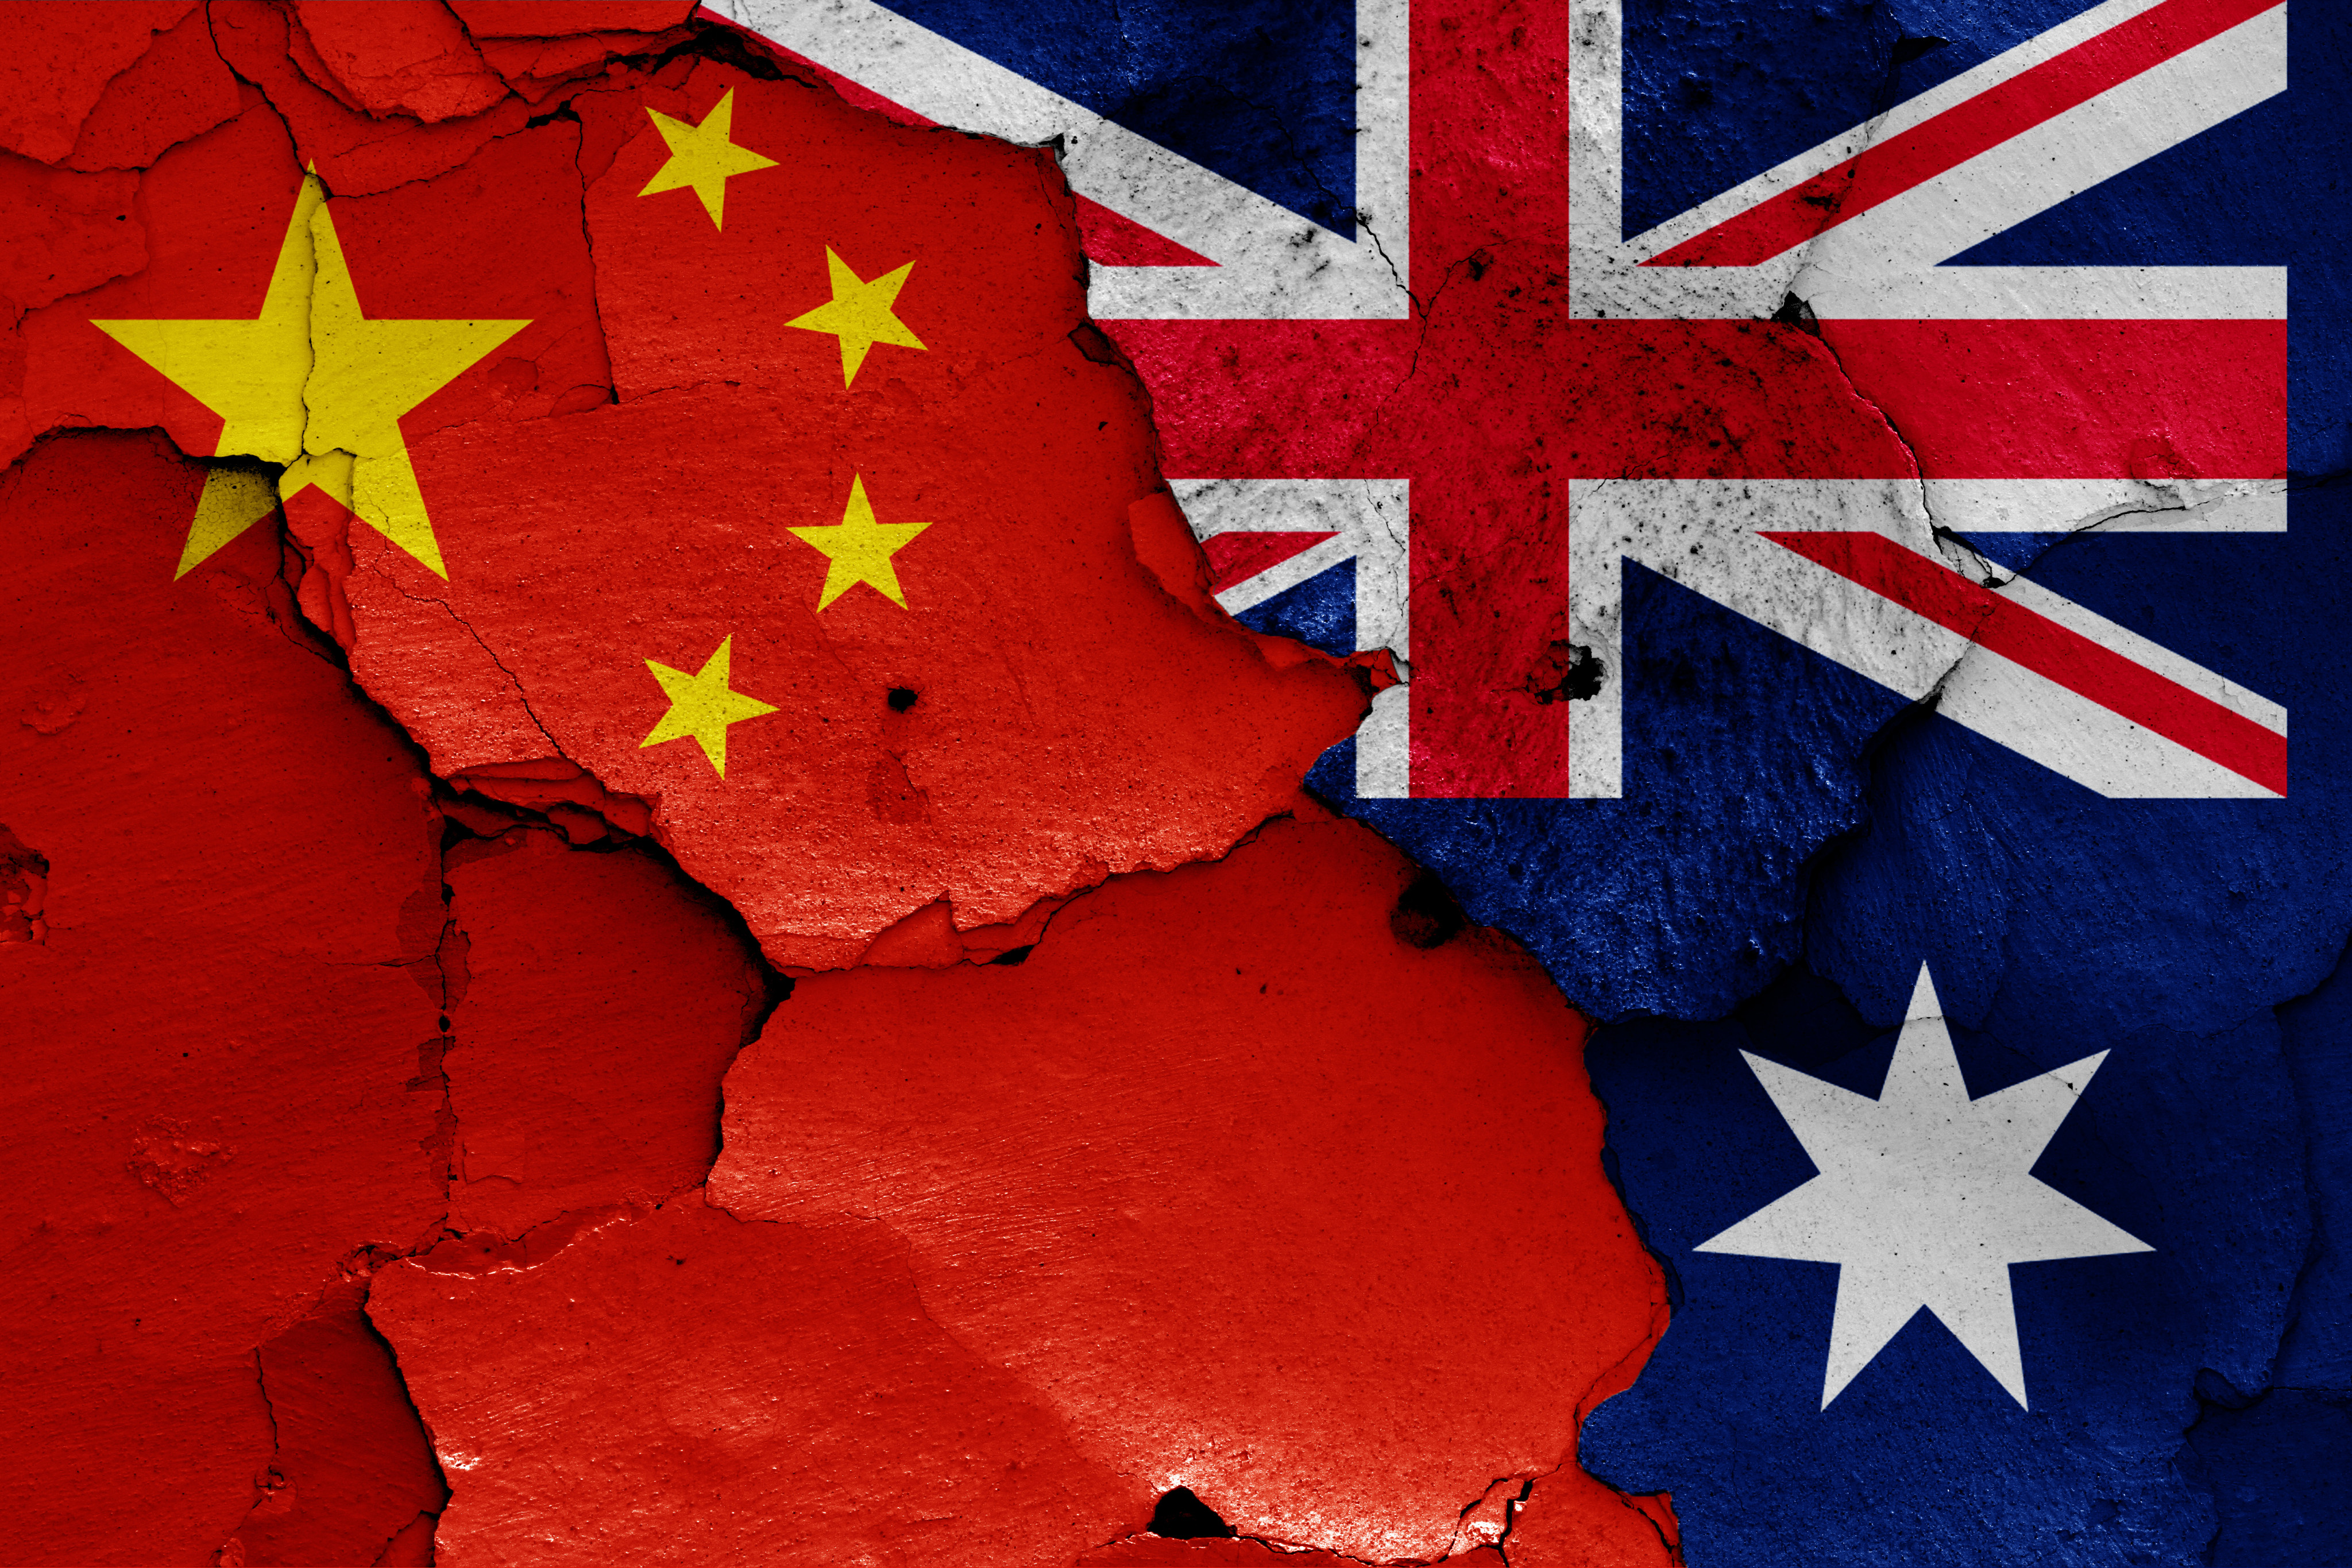 Canberra and Beijing have been at odds since April 2020, and trade remains adversely affected. Image: Shutterstock